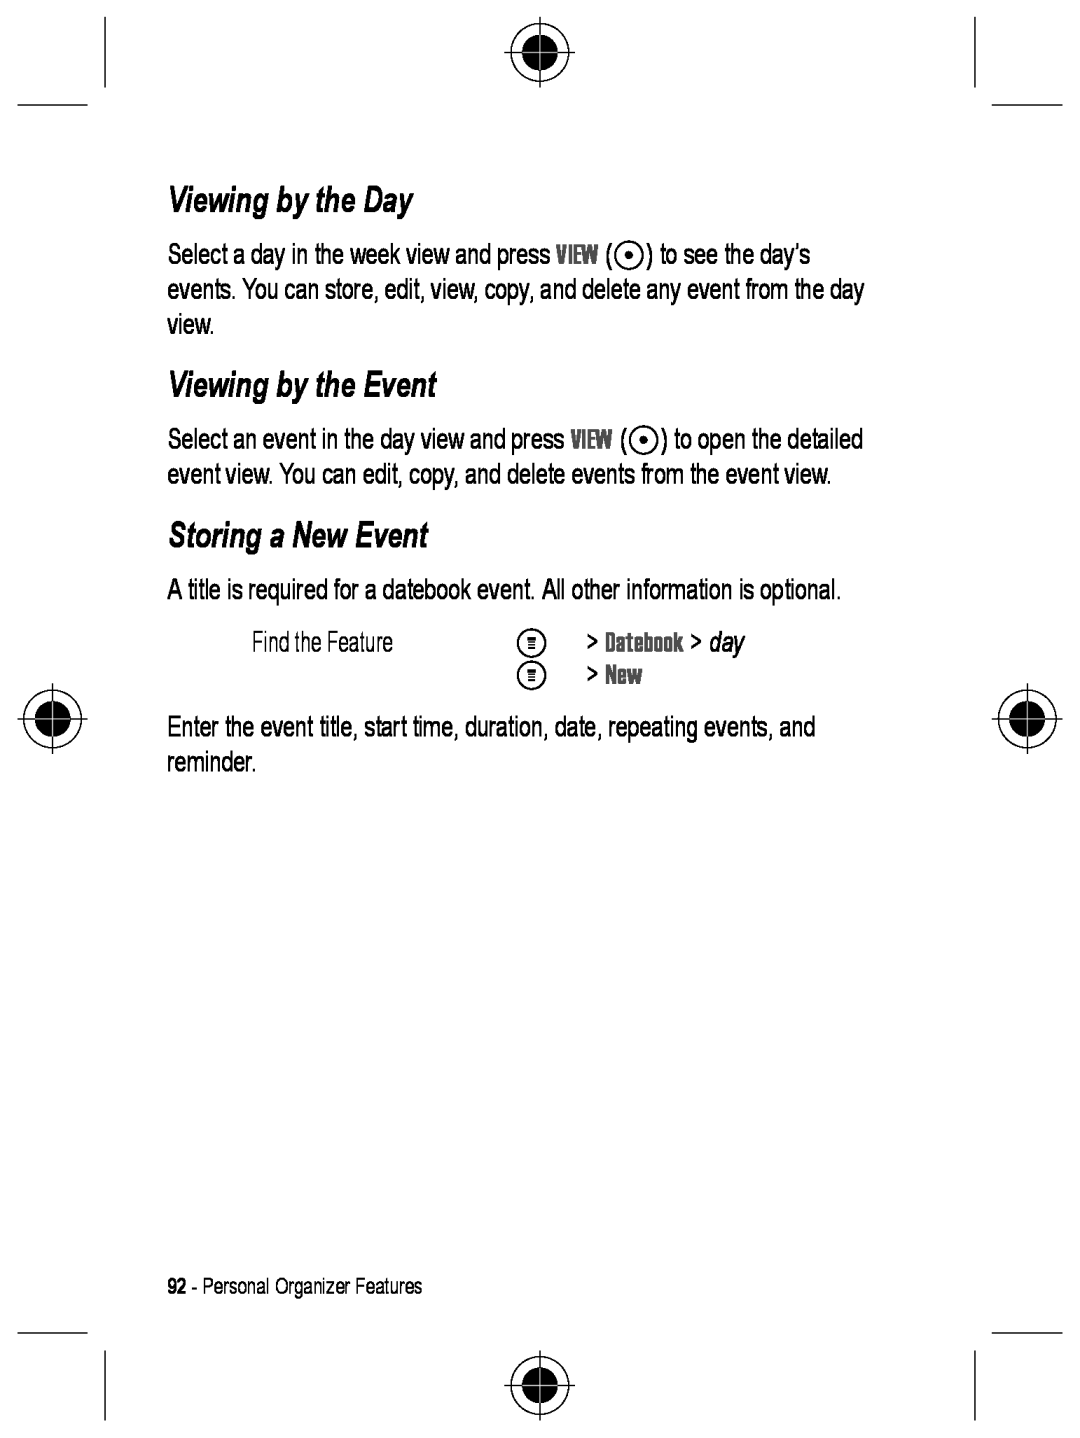 Motorola C330 manual Viewing by the Day, Viewing by the Event, Storing a New Event 